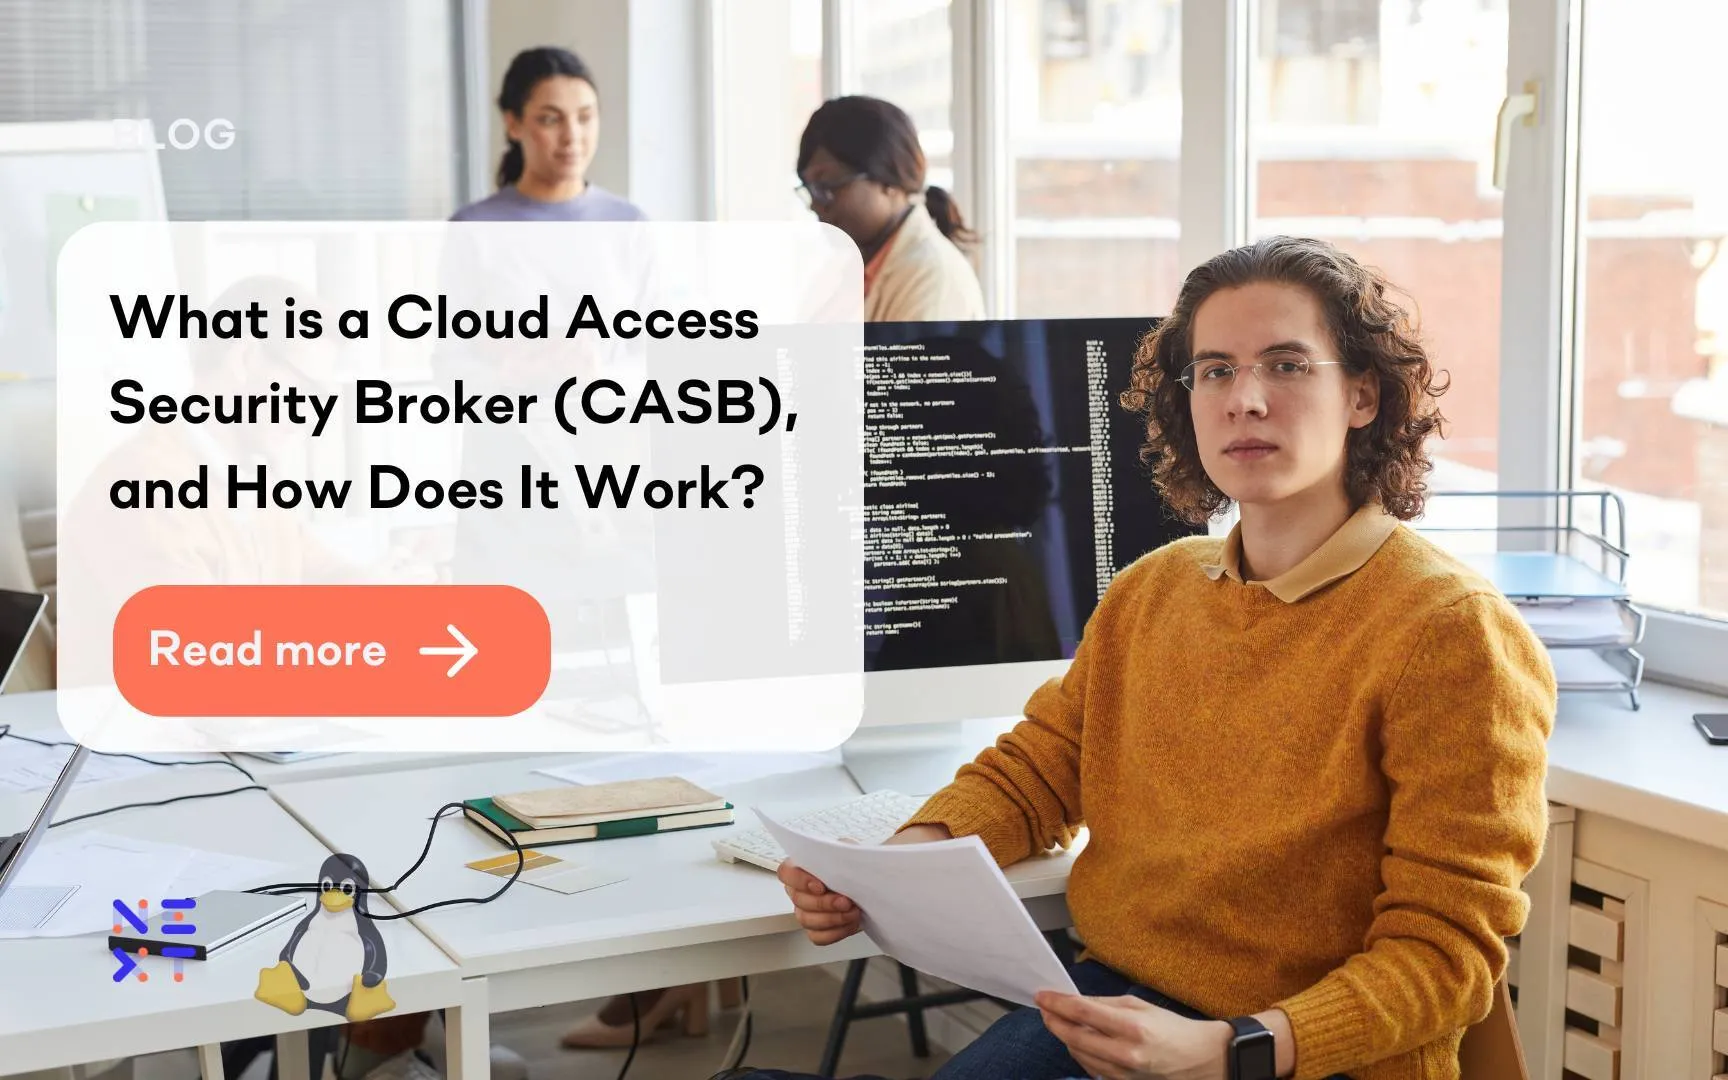 What is a Cloud Access Security Broker (CASB), and How Does It Work?